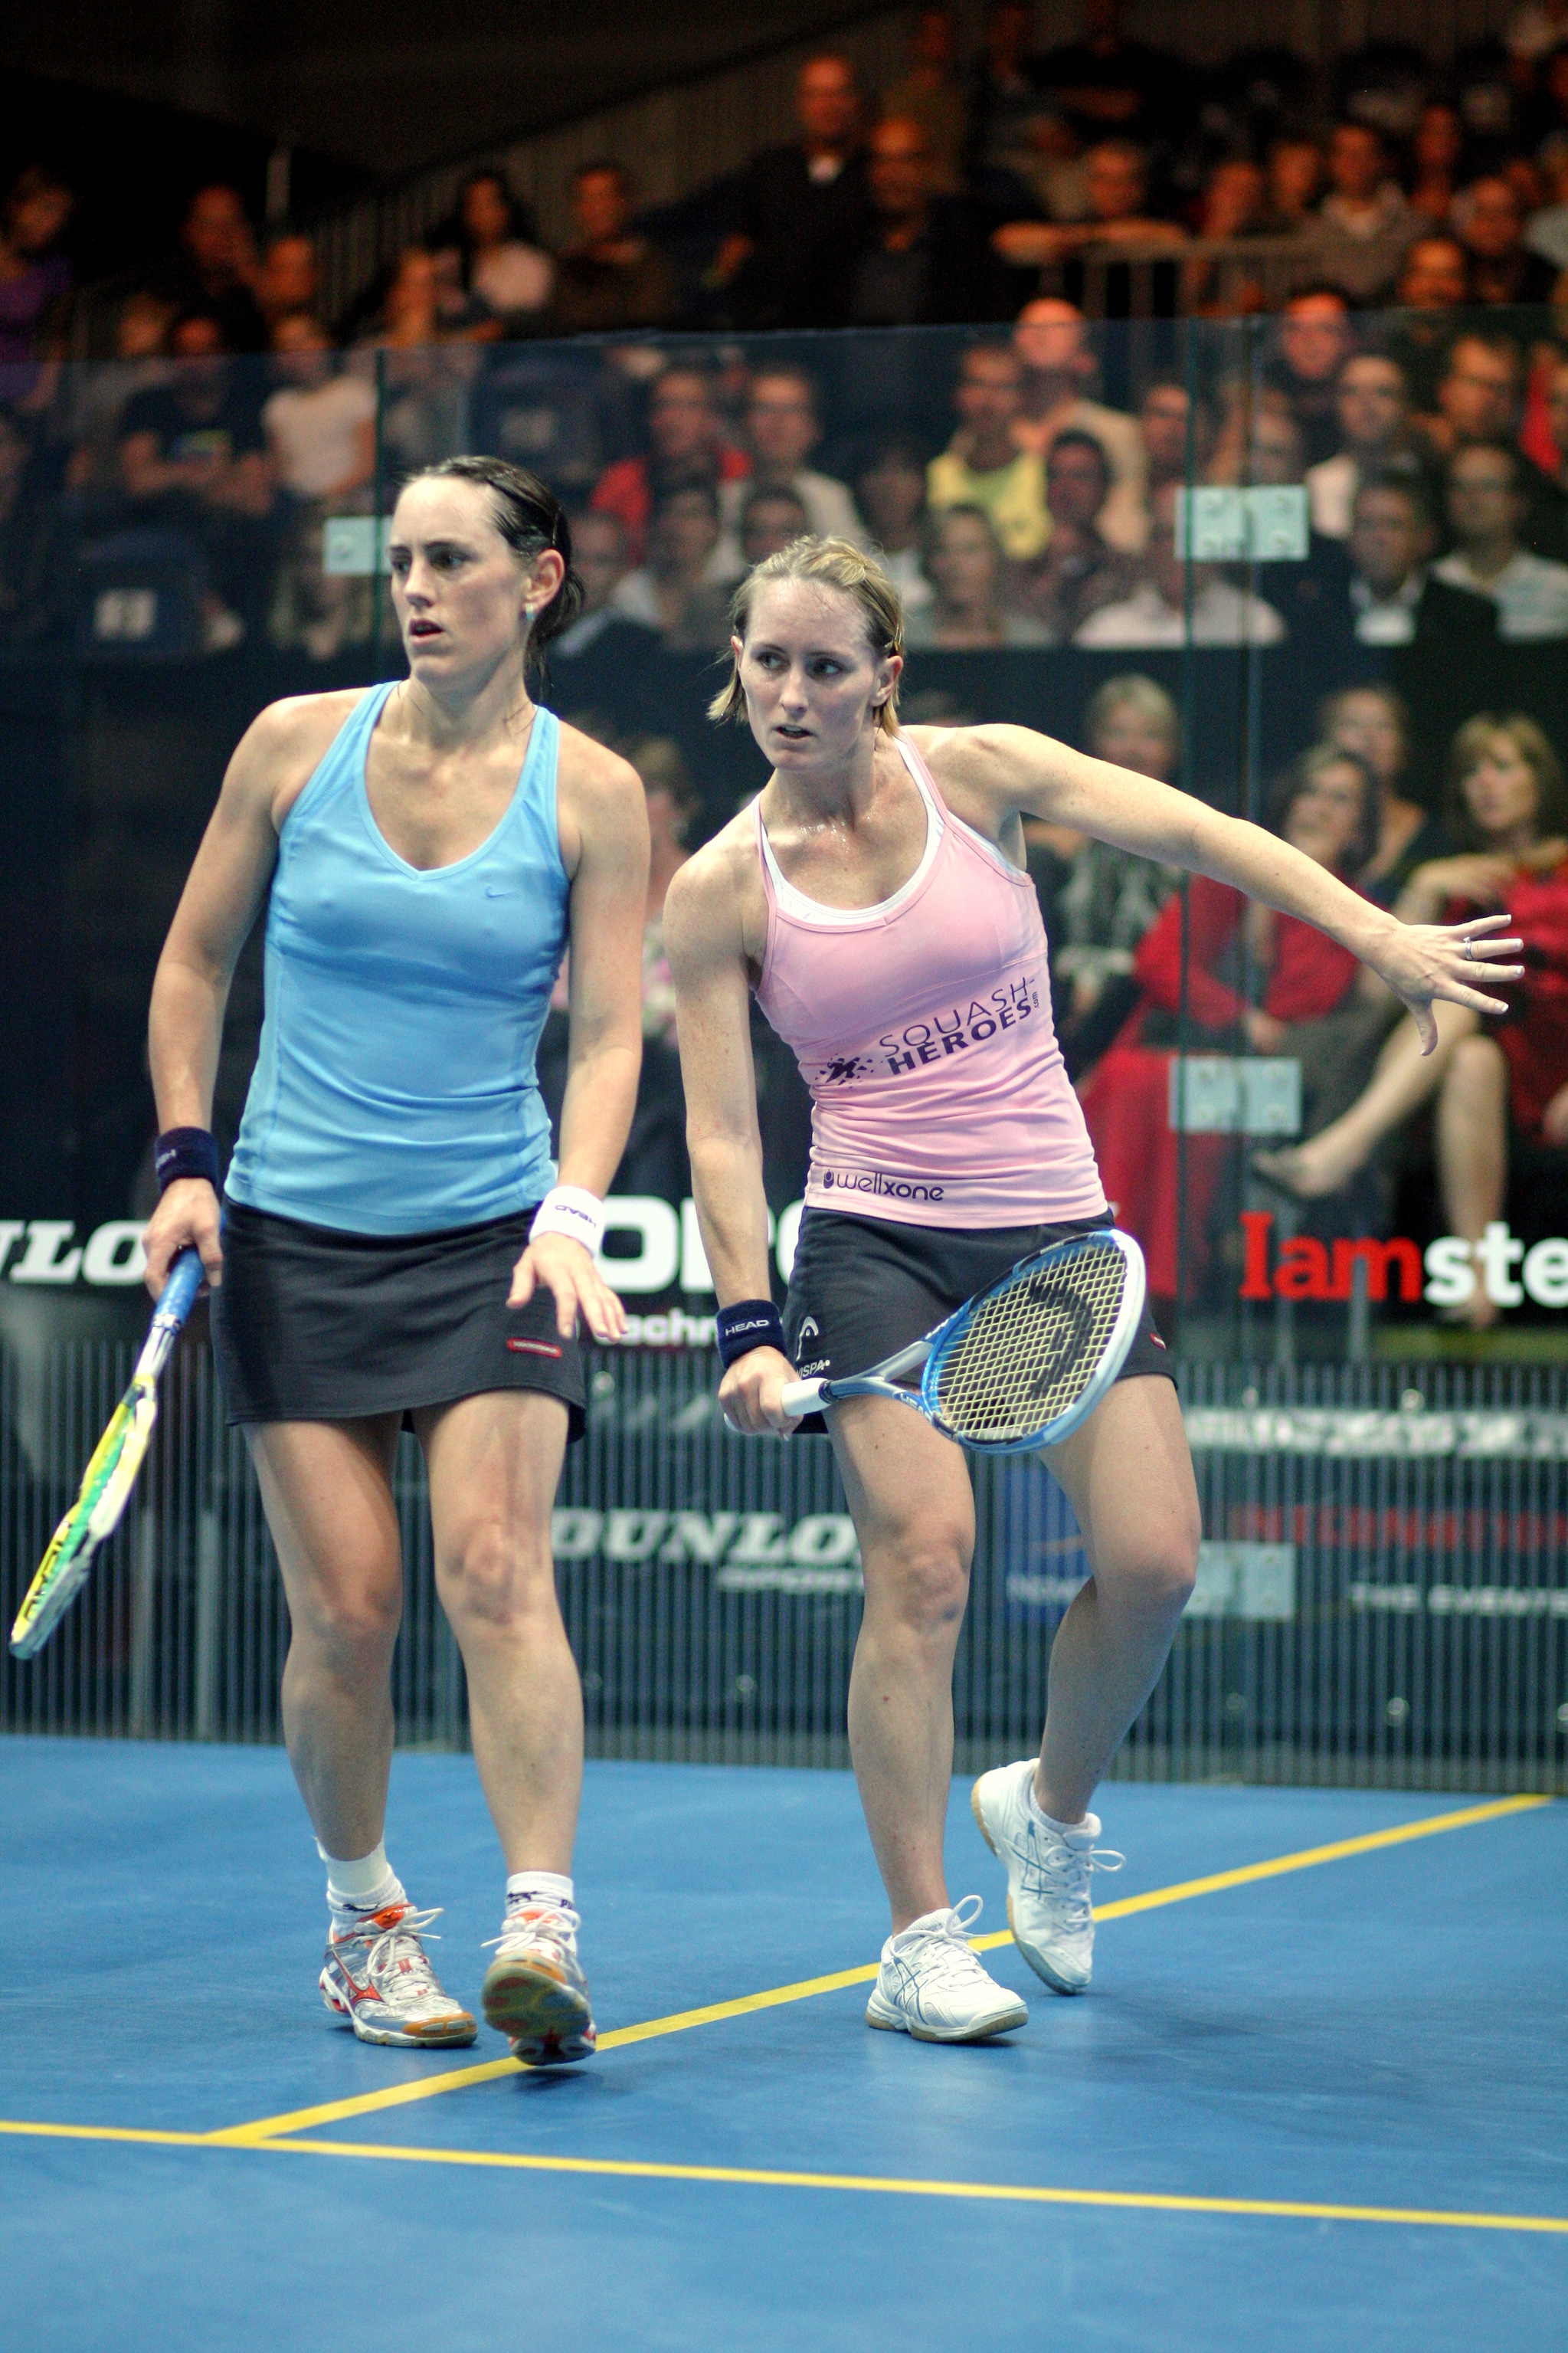 In a semifinal between sisters, it was Natalie Grinham (R) who exacted a bit of revenge on her elder, Rachael, by winning a tight four games after dropping the first. In 2007, Rachael beat Natalie in the final to win her only World Open title.